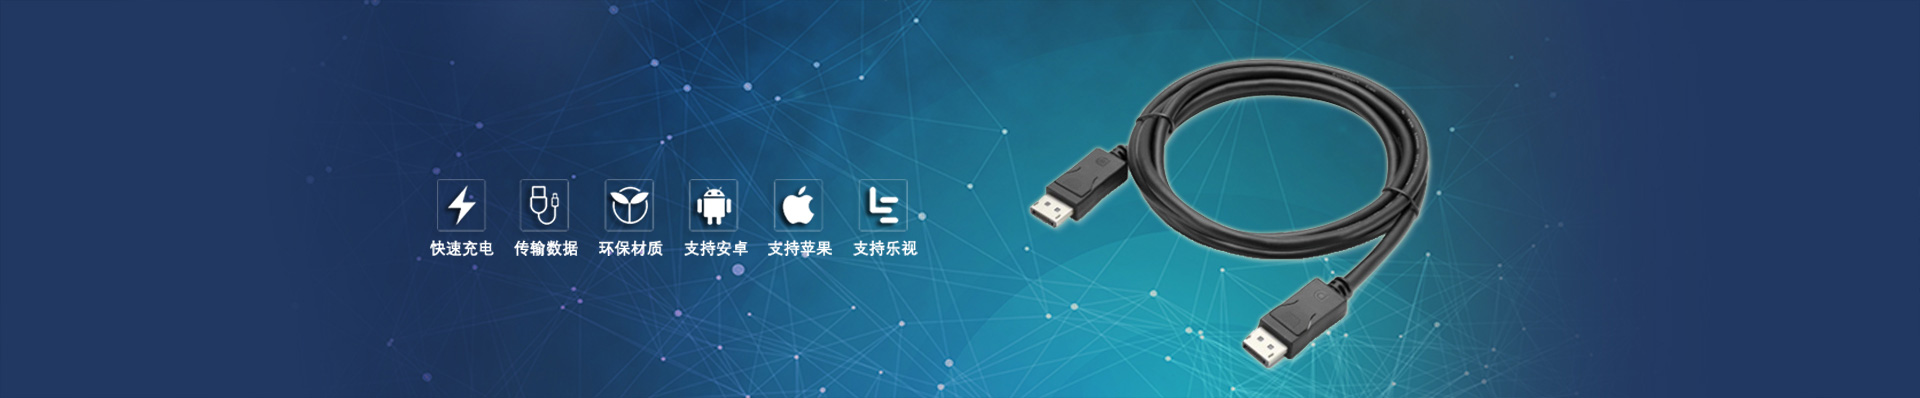 USB2.0&3.0 Cable